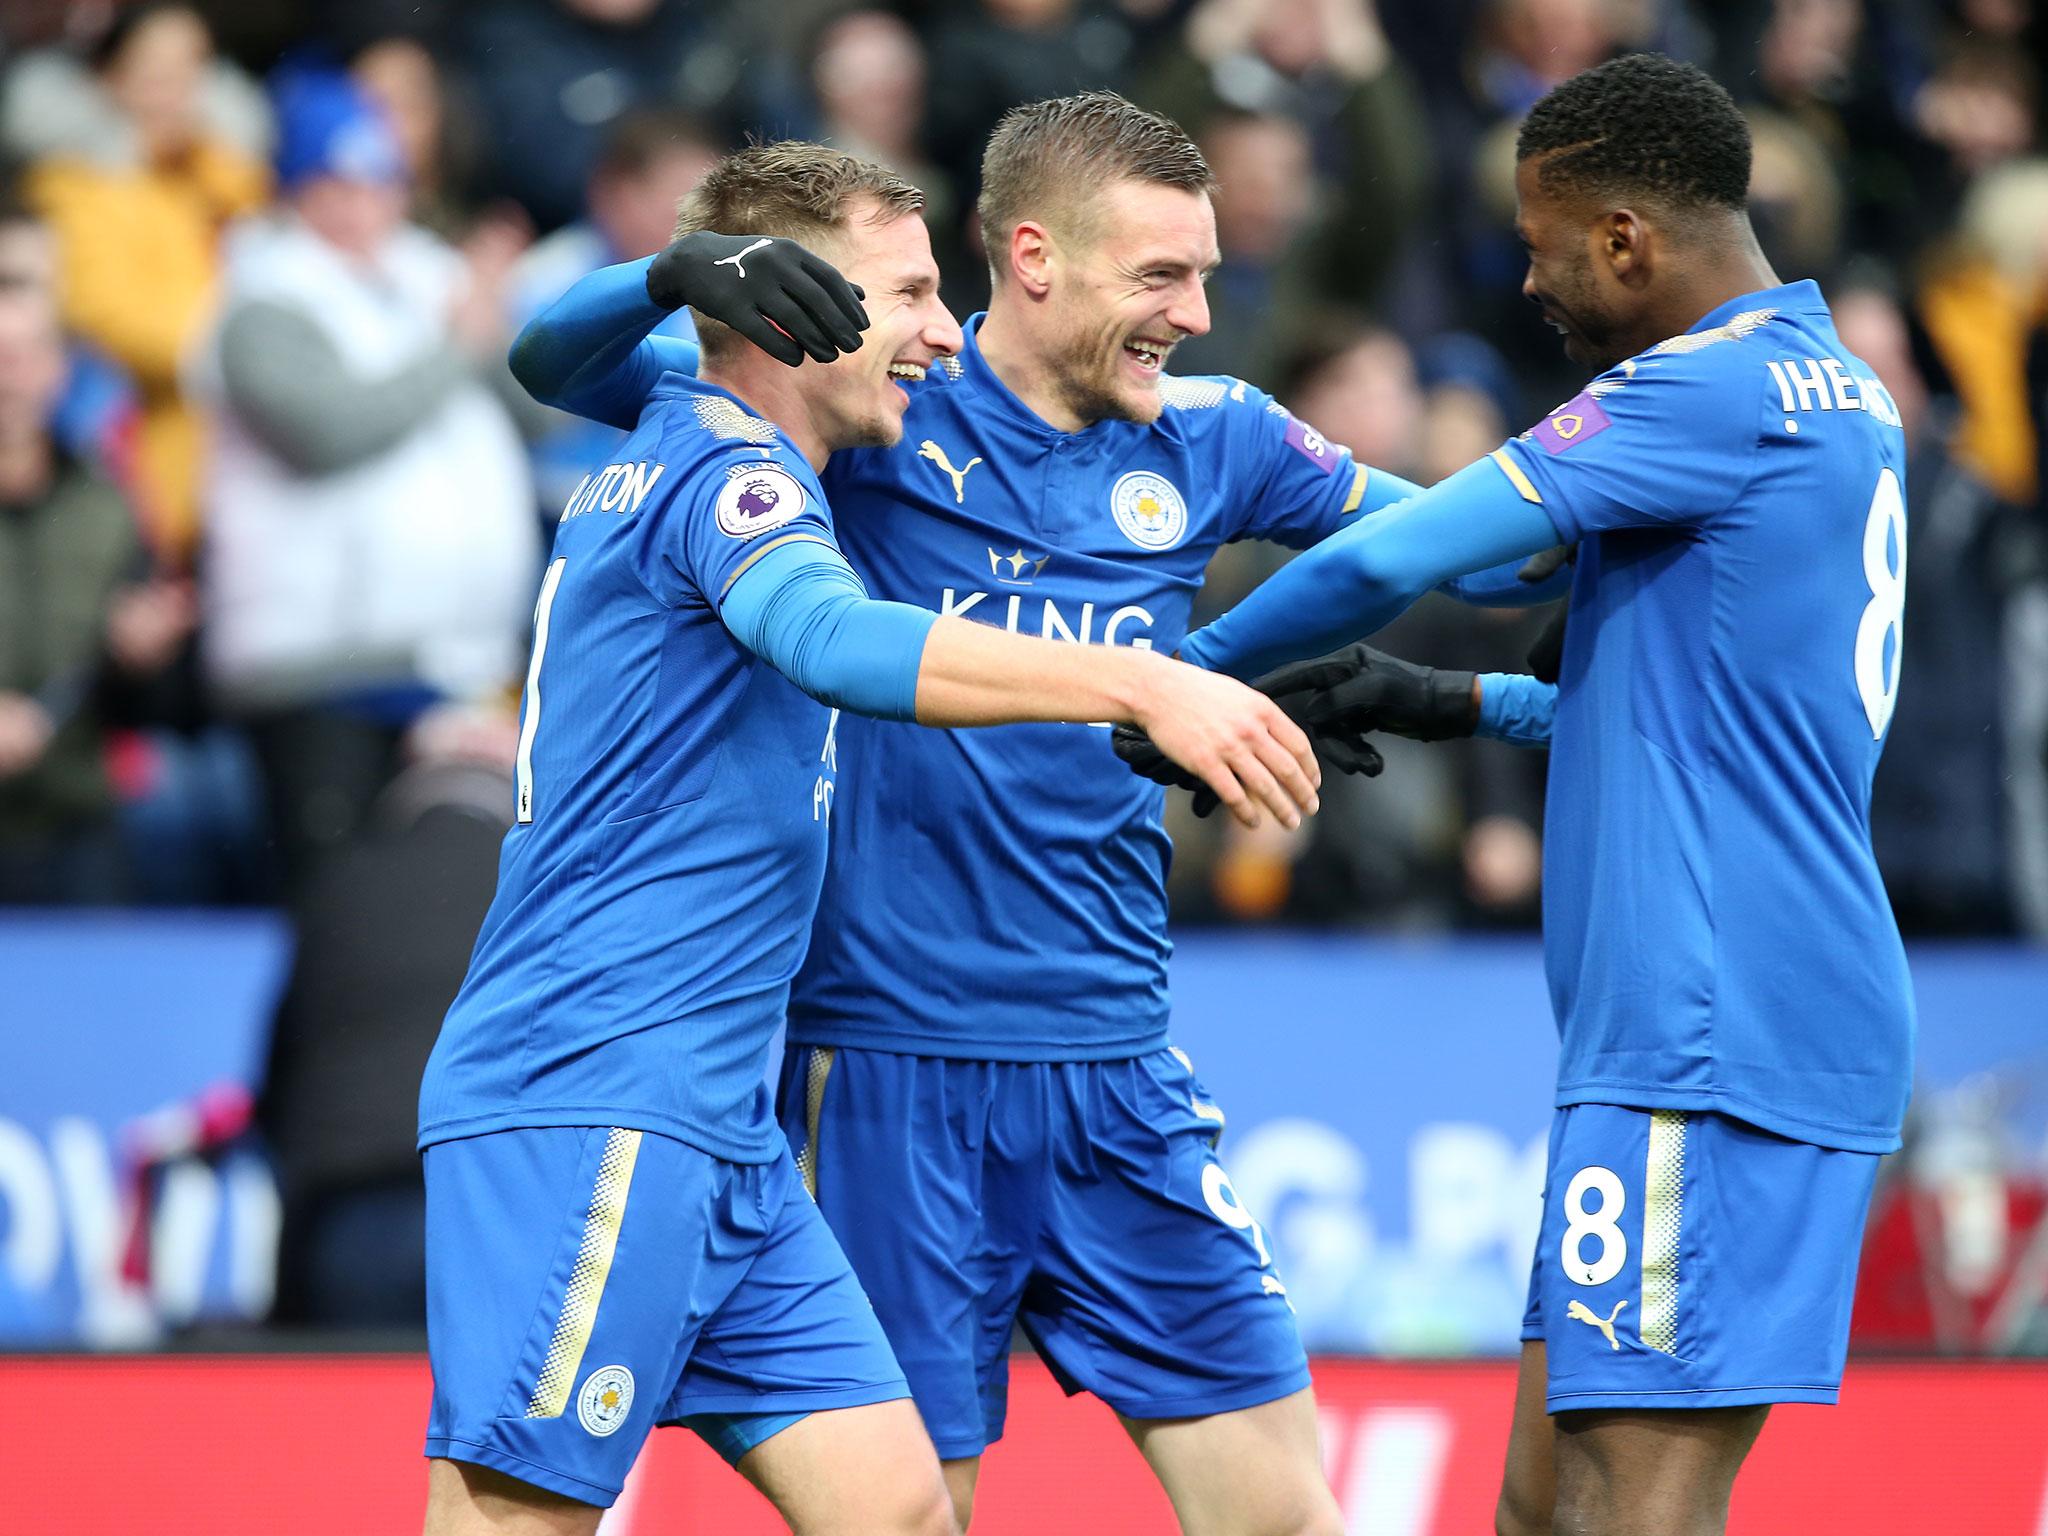 Leicester can prove that progress has been made since their title-winning season by winning the FA Cup